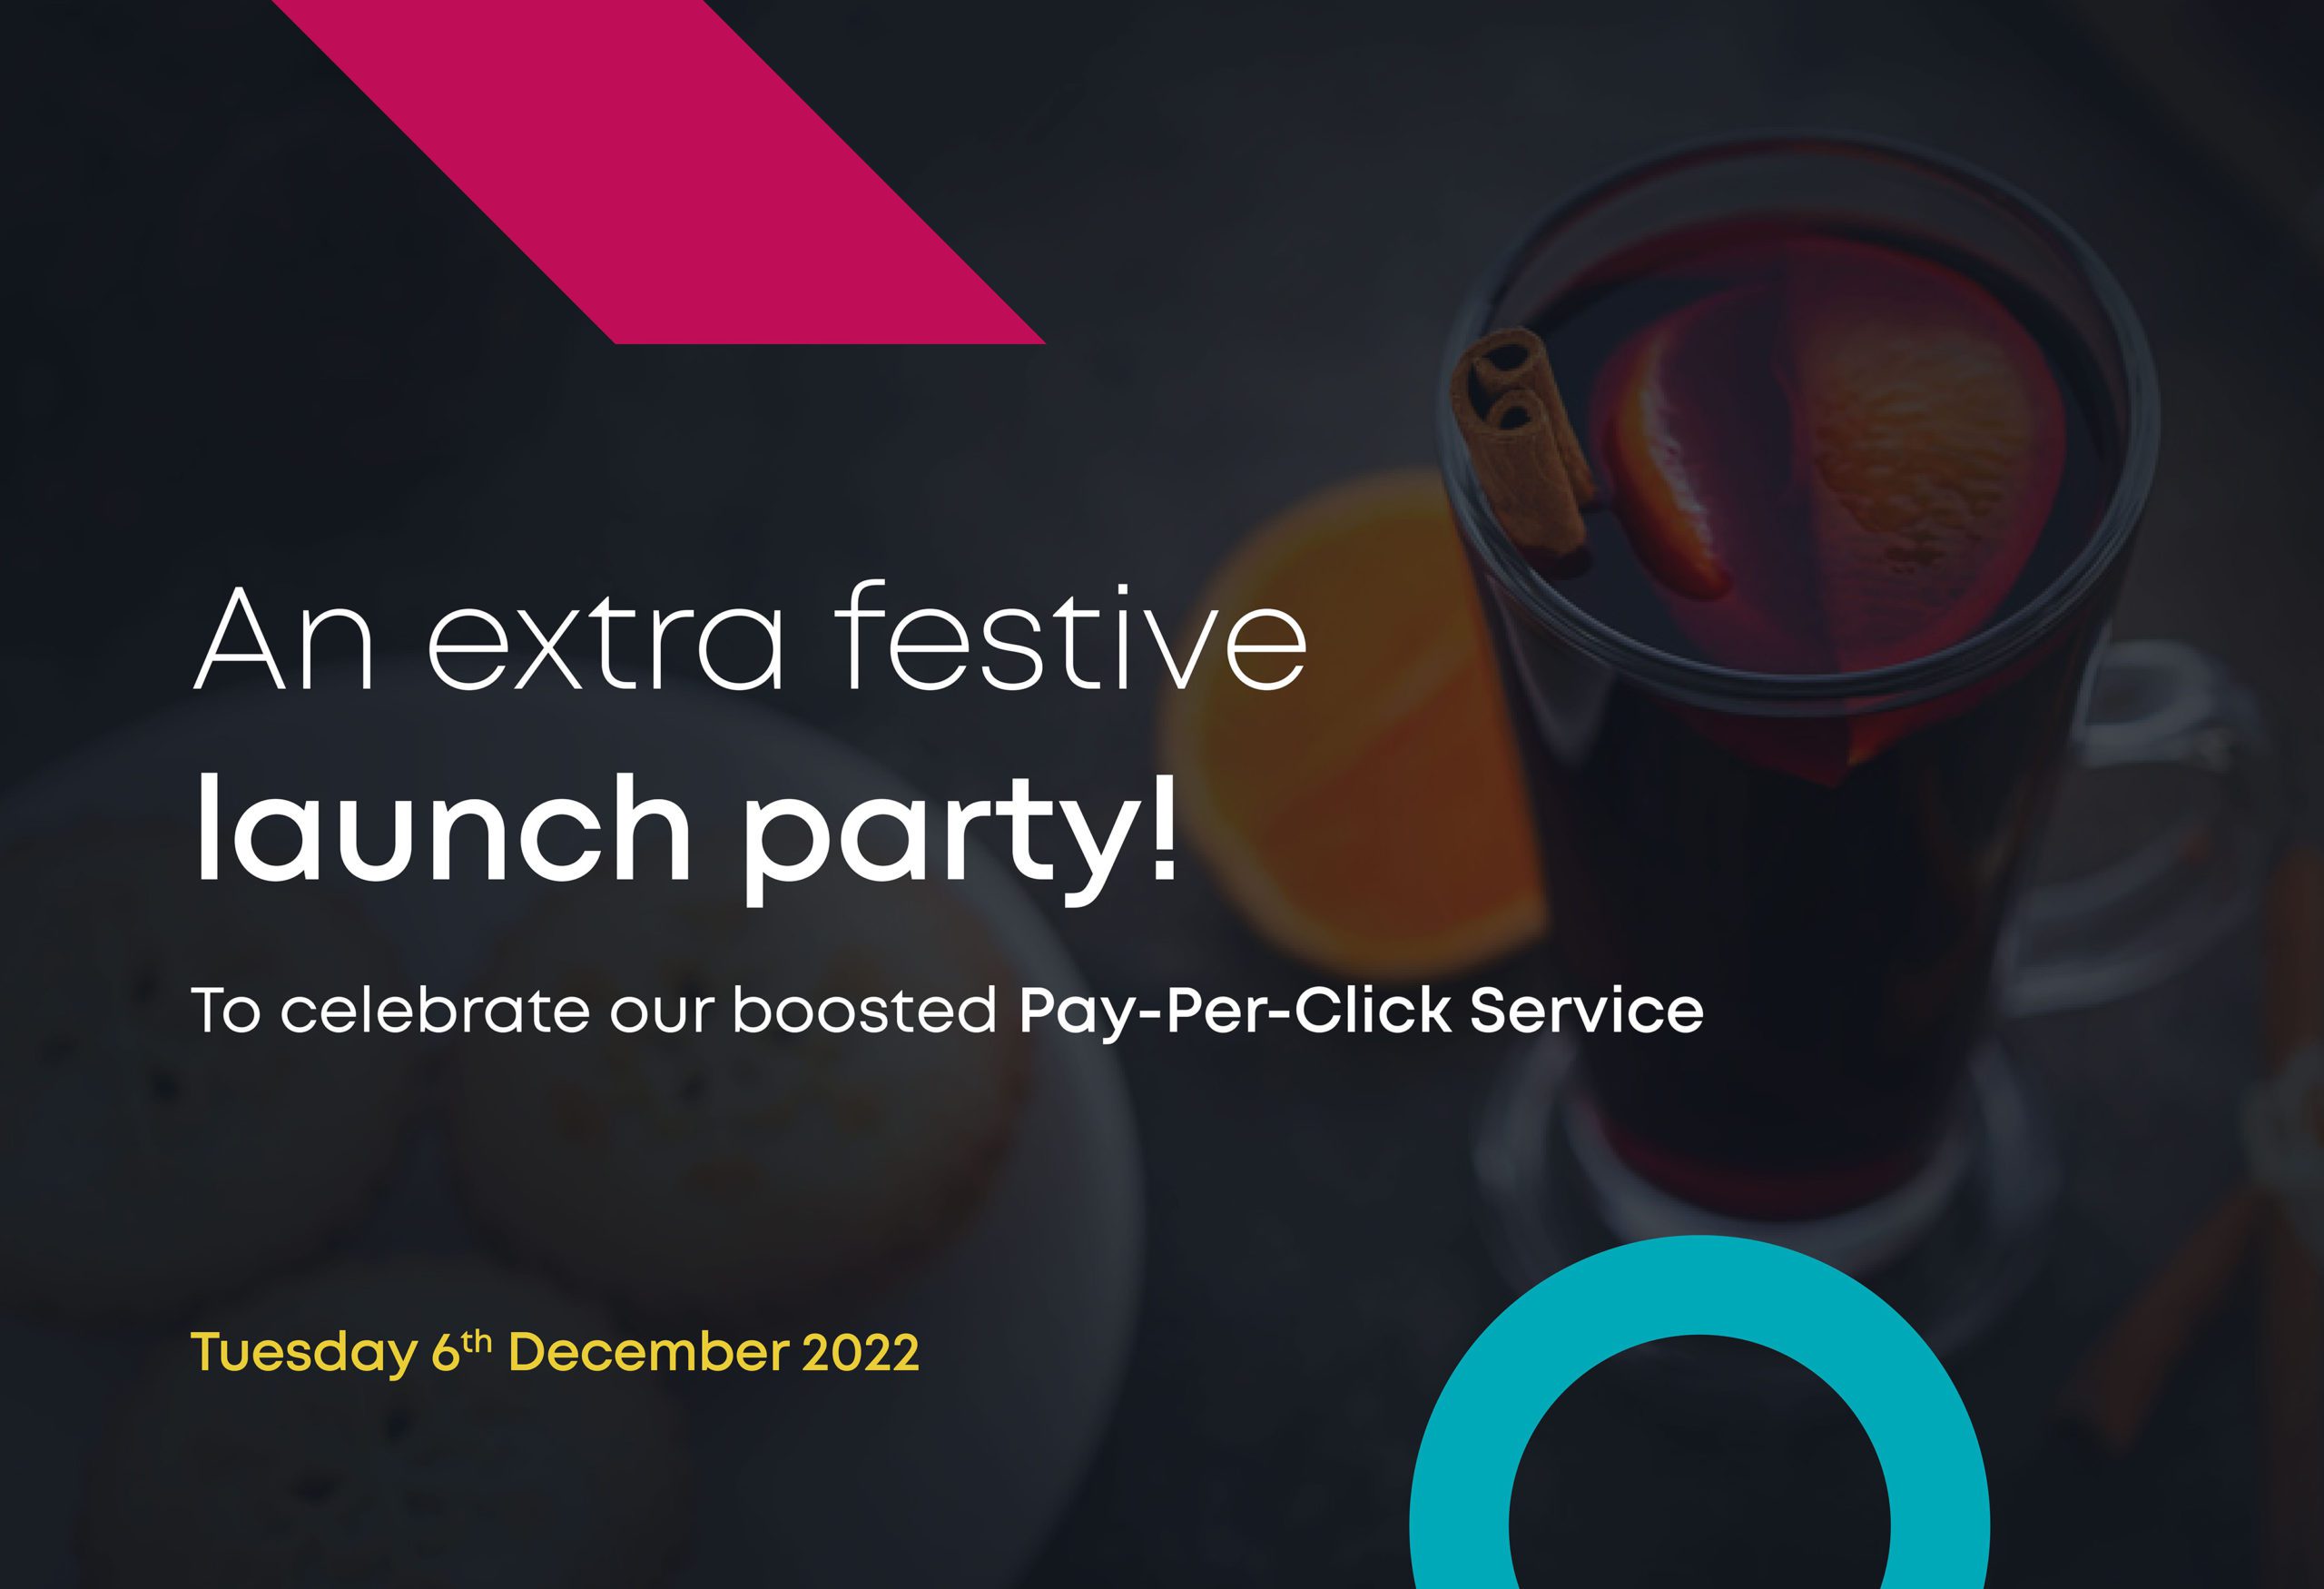 You’re invited to an extra festive launch party